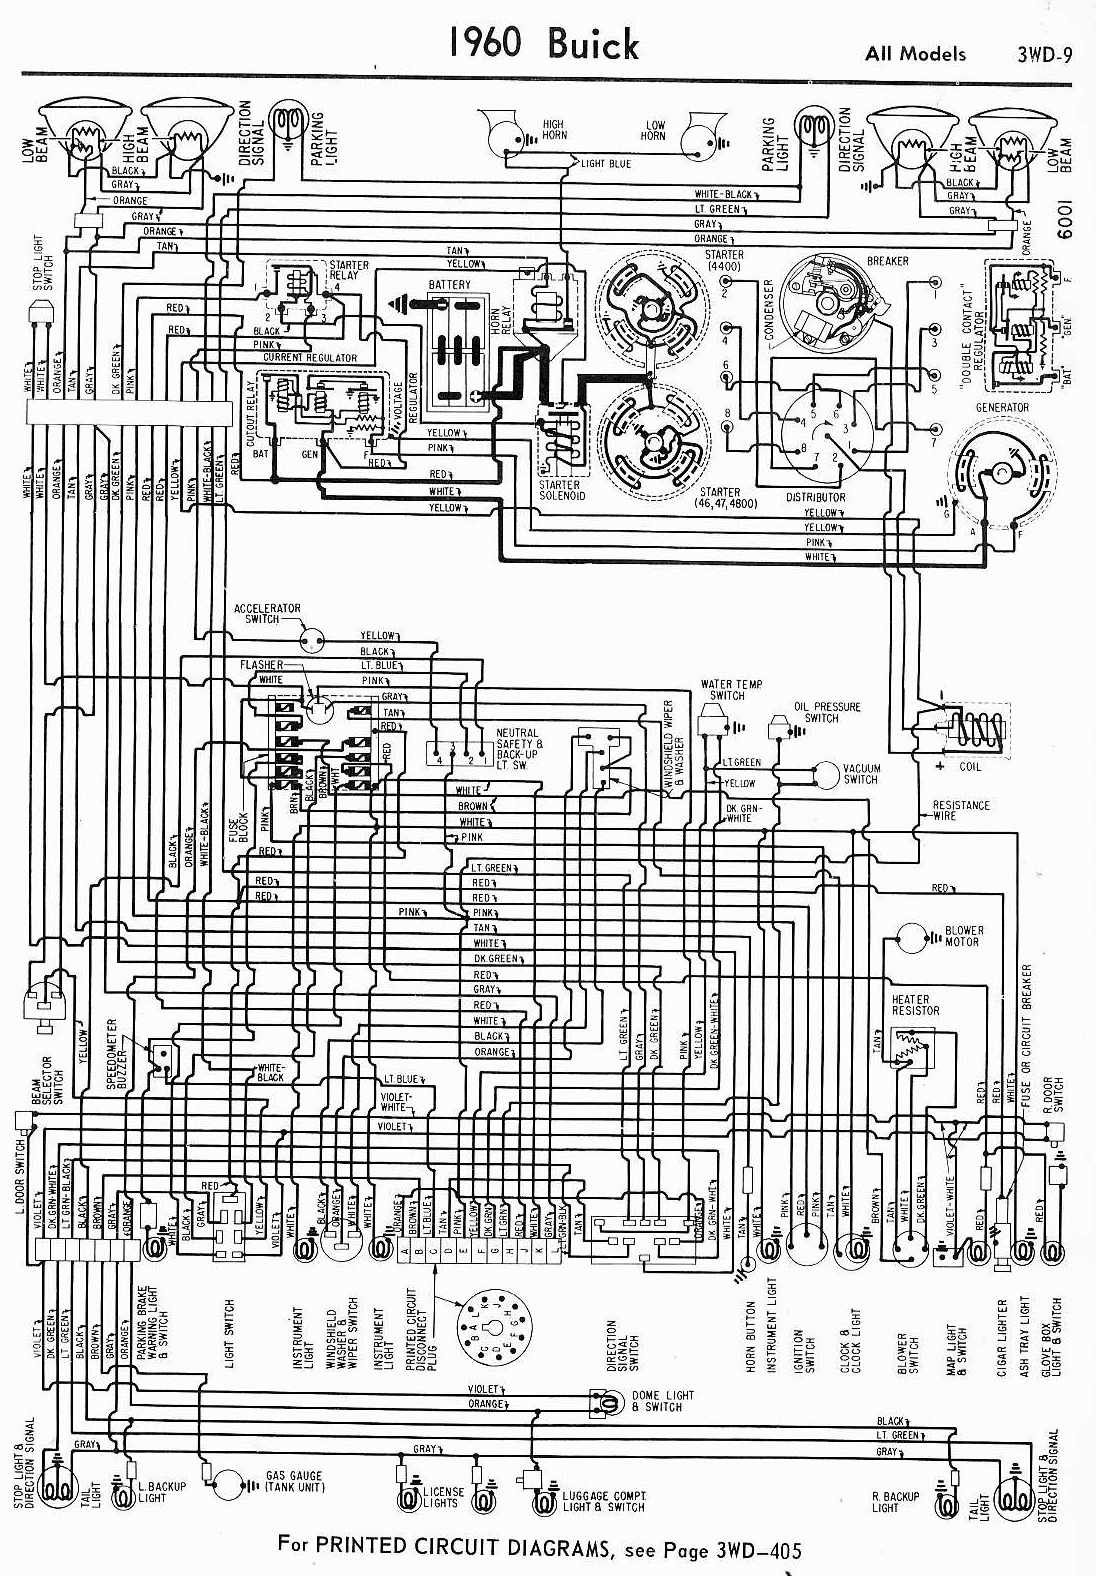 1993 Buick Lesabre Wiring Diagram from www.automotive-manuals.net